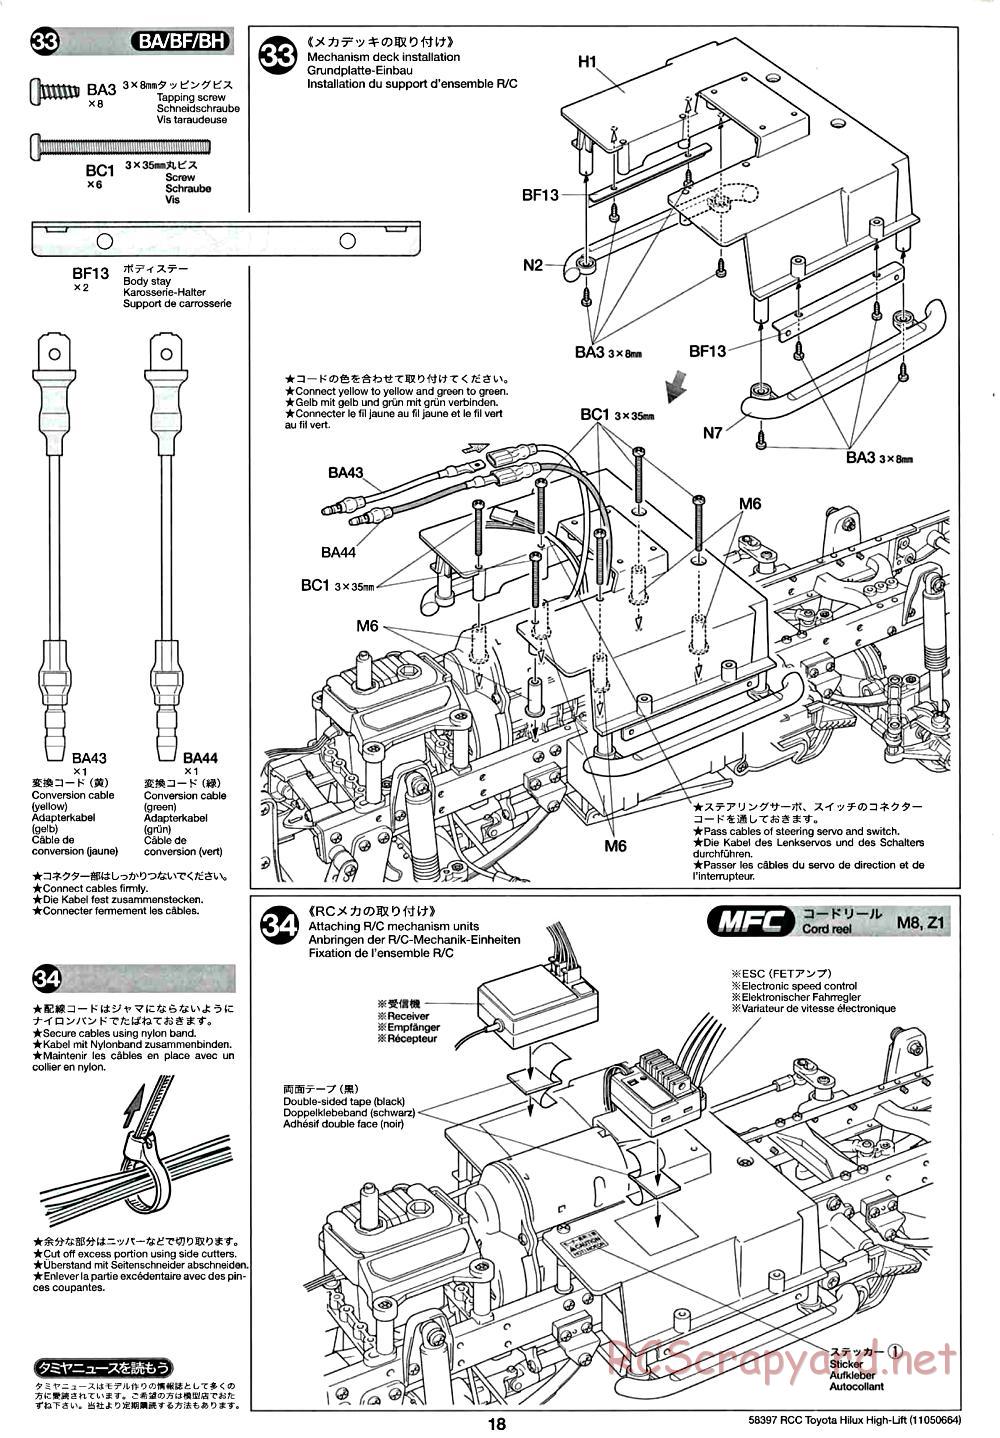 Tamiya - Toyota Hilux High-Lift Chassis - Manual - Page 18